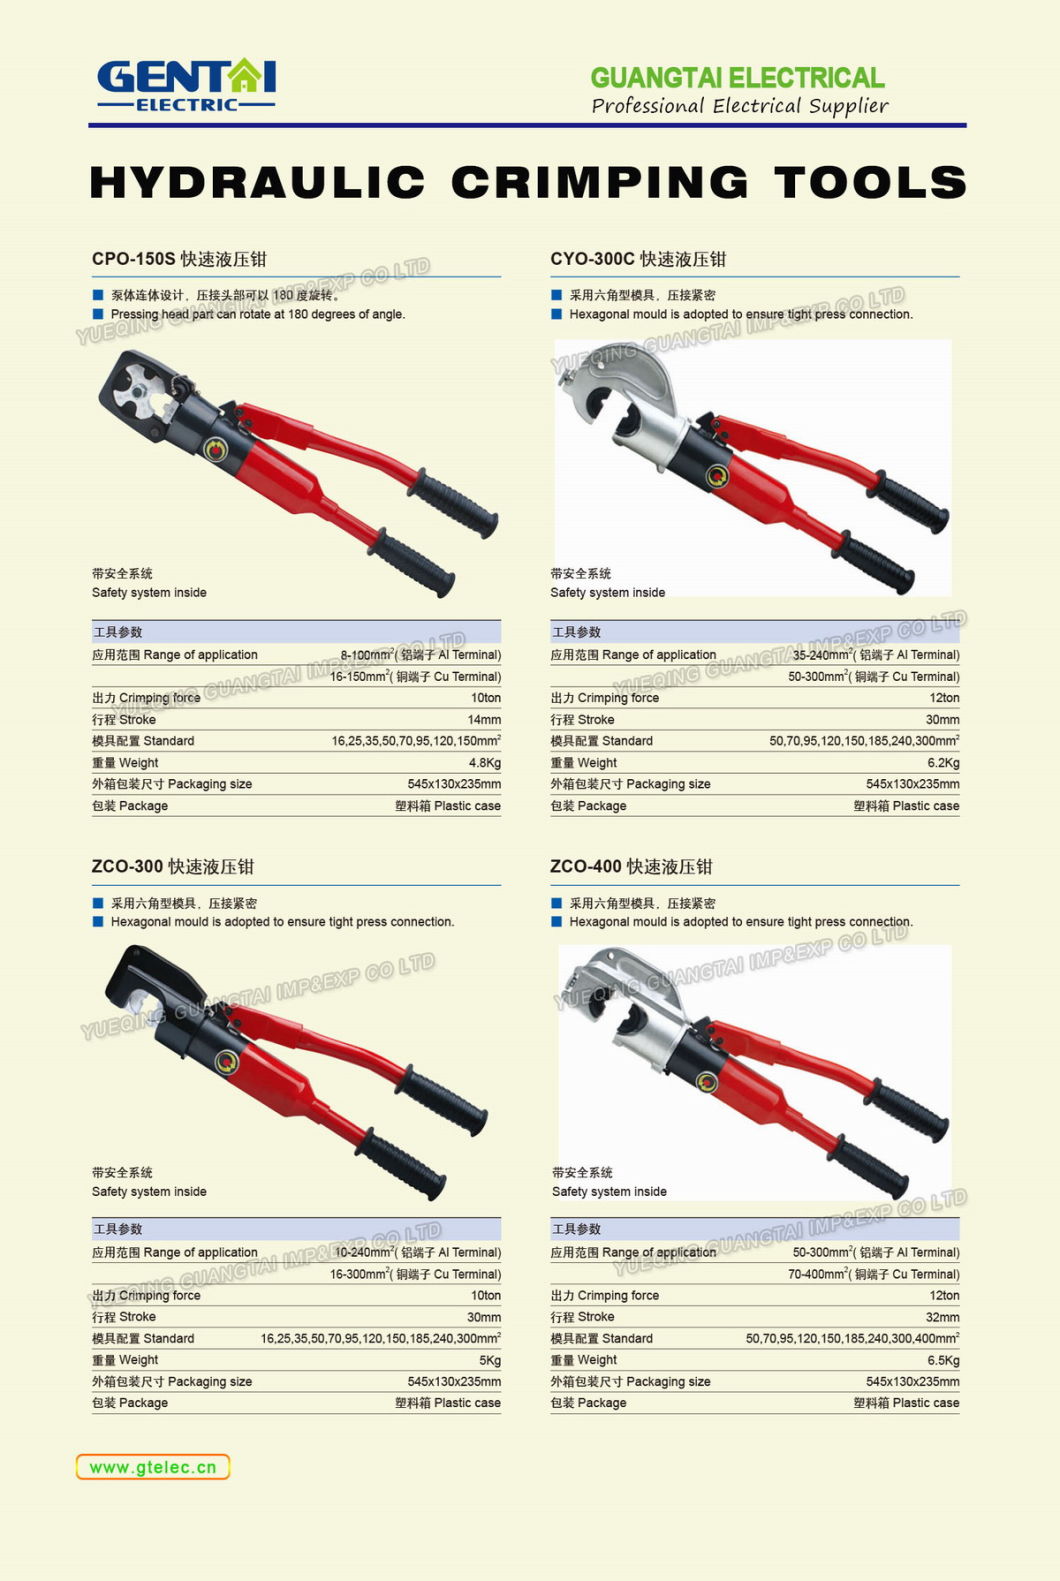 Good Quality Hand Cable Cutter Cable Stripper Knife (KBX-65)